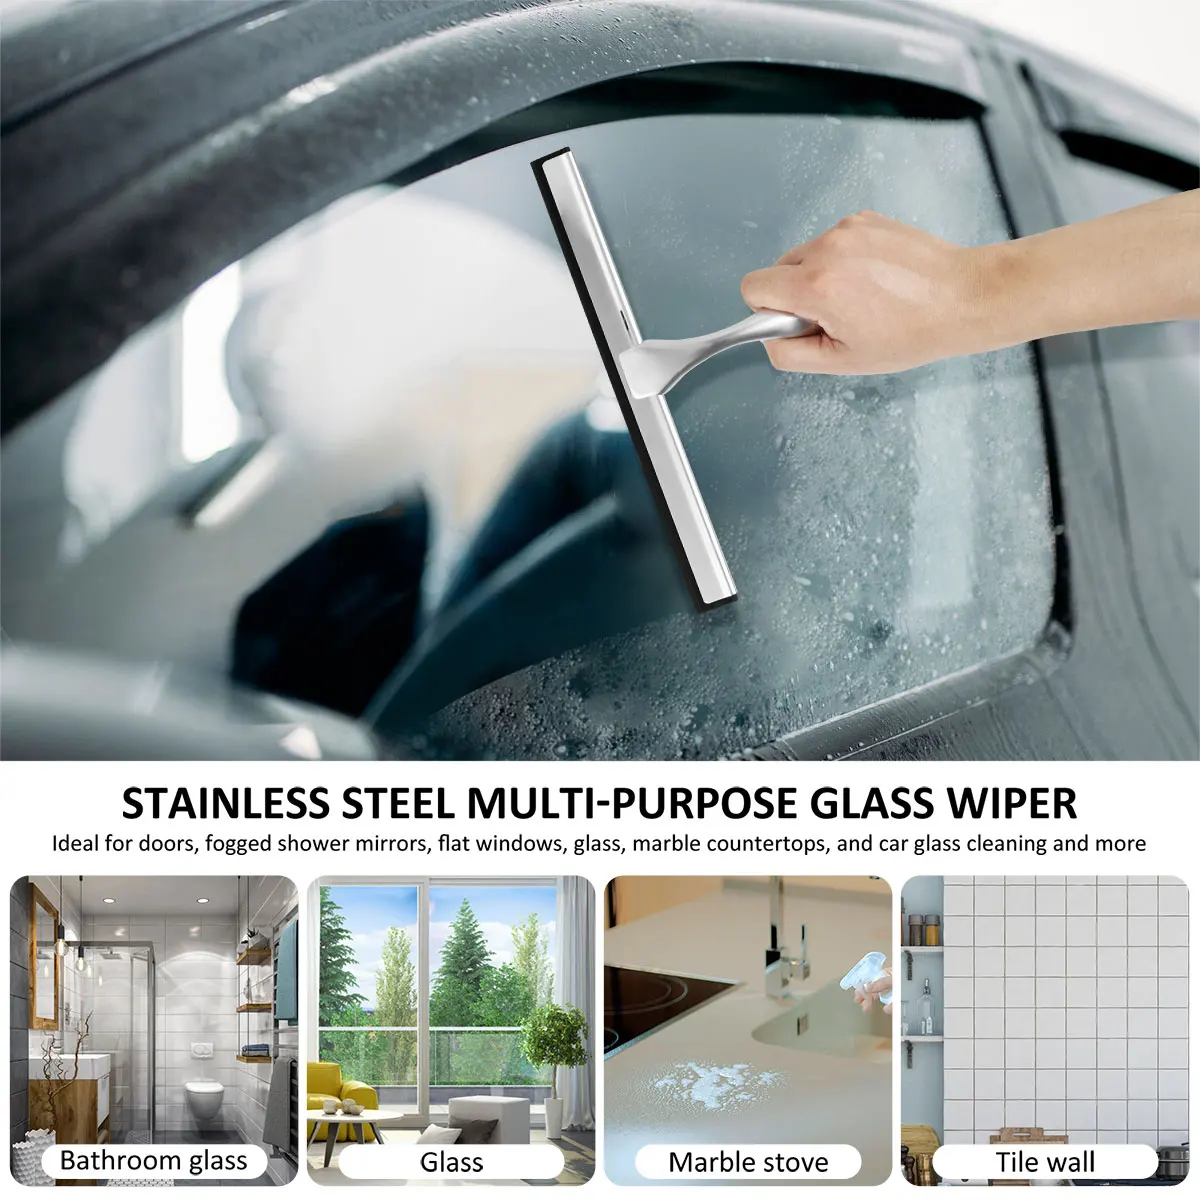 Small Squeegee For Shower Multi-Purpose Bathroom Window Squeegee For Window  Glass Shower Door Car Windshield Cleaning Tool - AliExpress